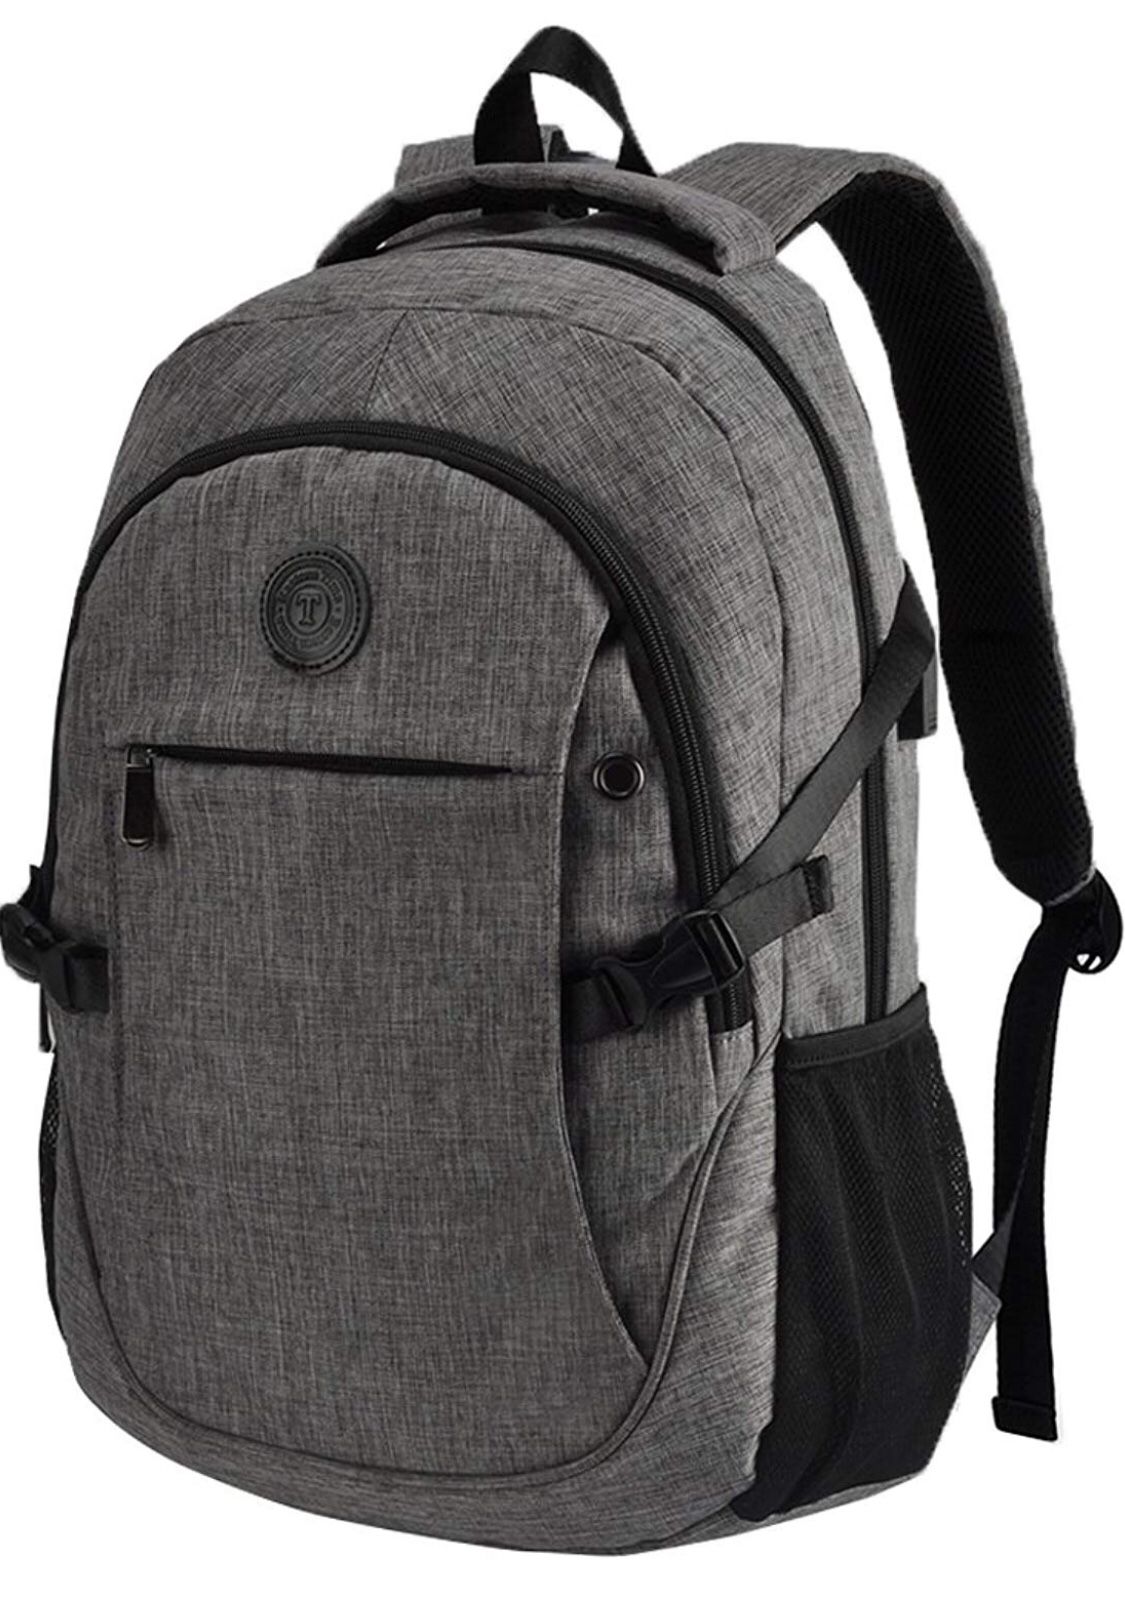 Brand-new Laptop Backpack with USB Charging Headphone Port,15.6 inch Water Resistant Nylon School Backpacks by Eastern Time /2007Lightgrey